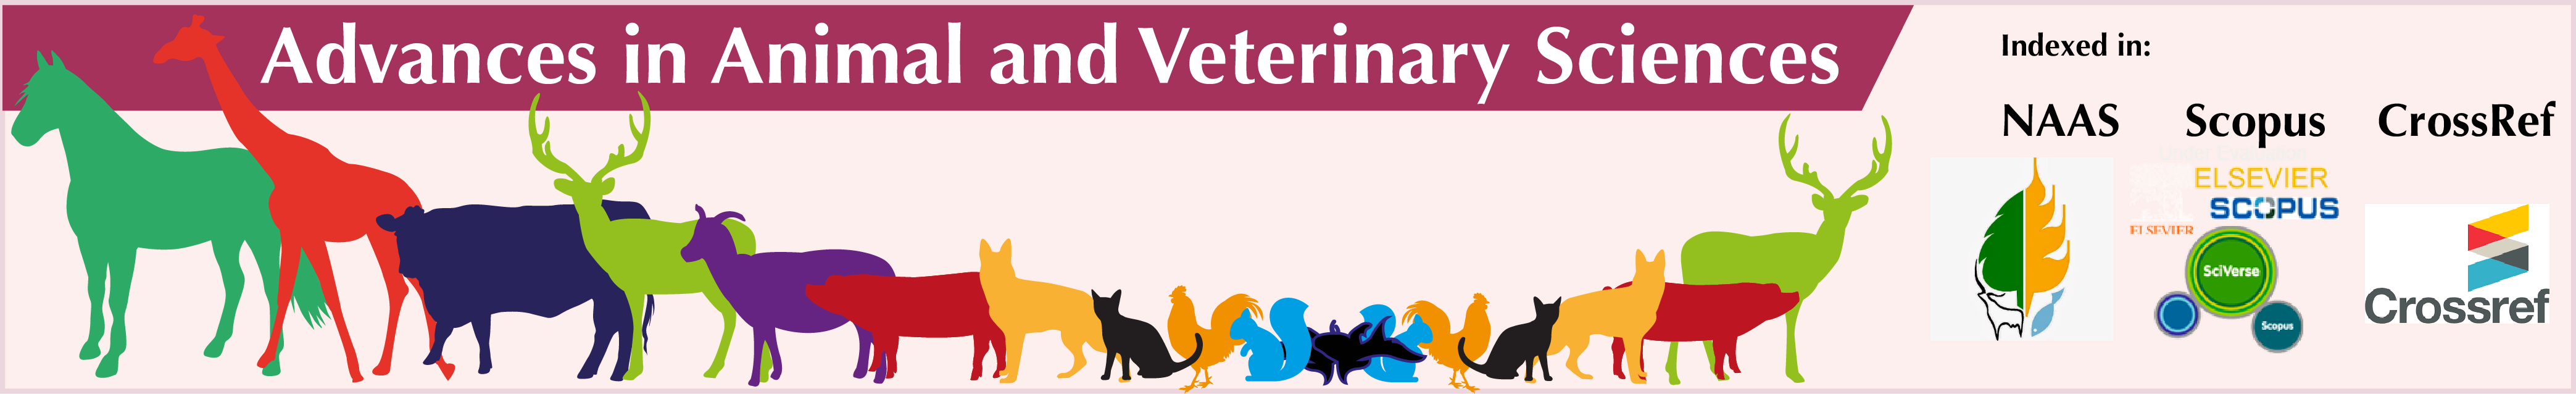 Advances in Animal and Veterinary Sciences